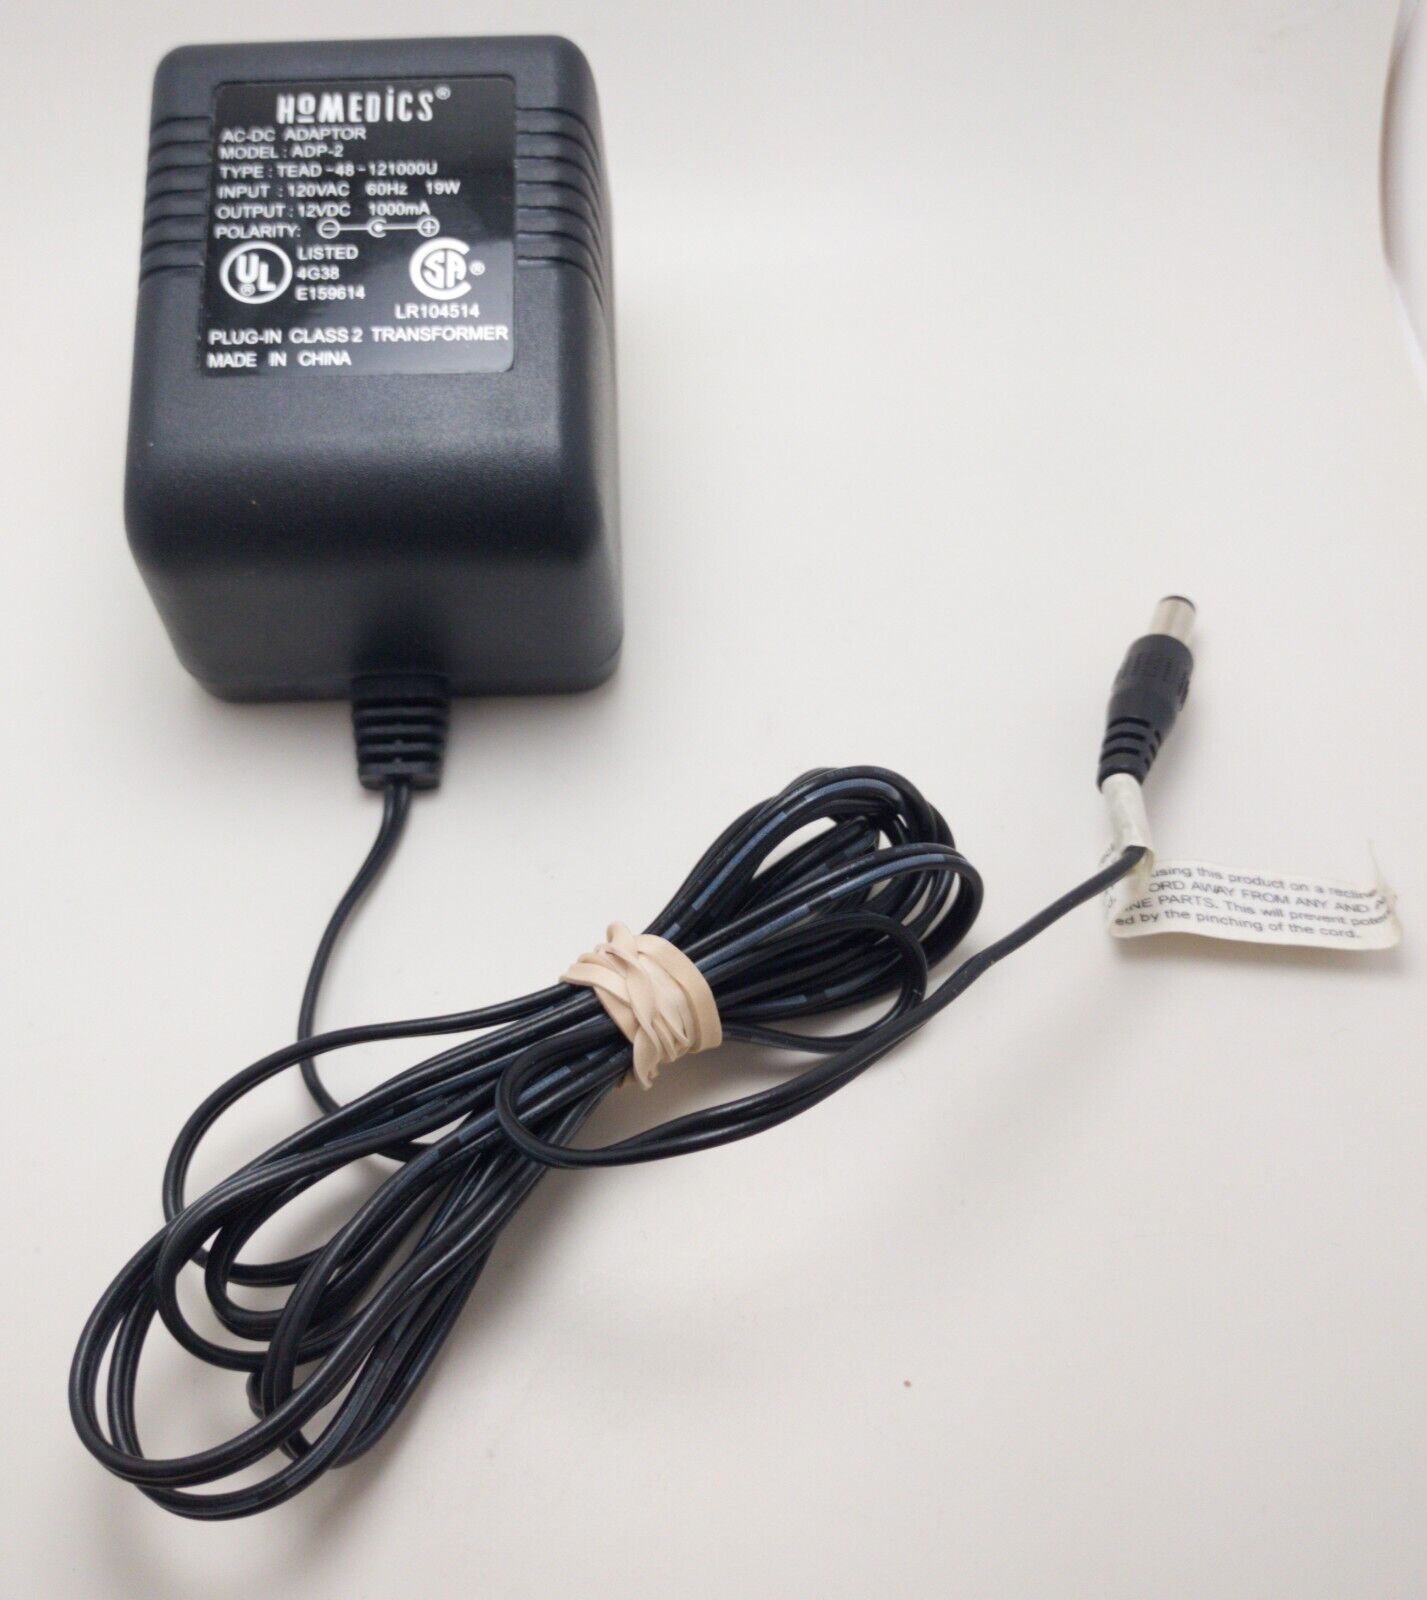 *Brand NEW* HoMEDICS In 120v Out 12VDC 1000mA Test AC-DC Adapter ADP-2 TEAD-48-121000U Power Supply